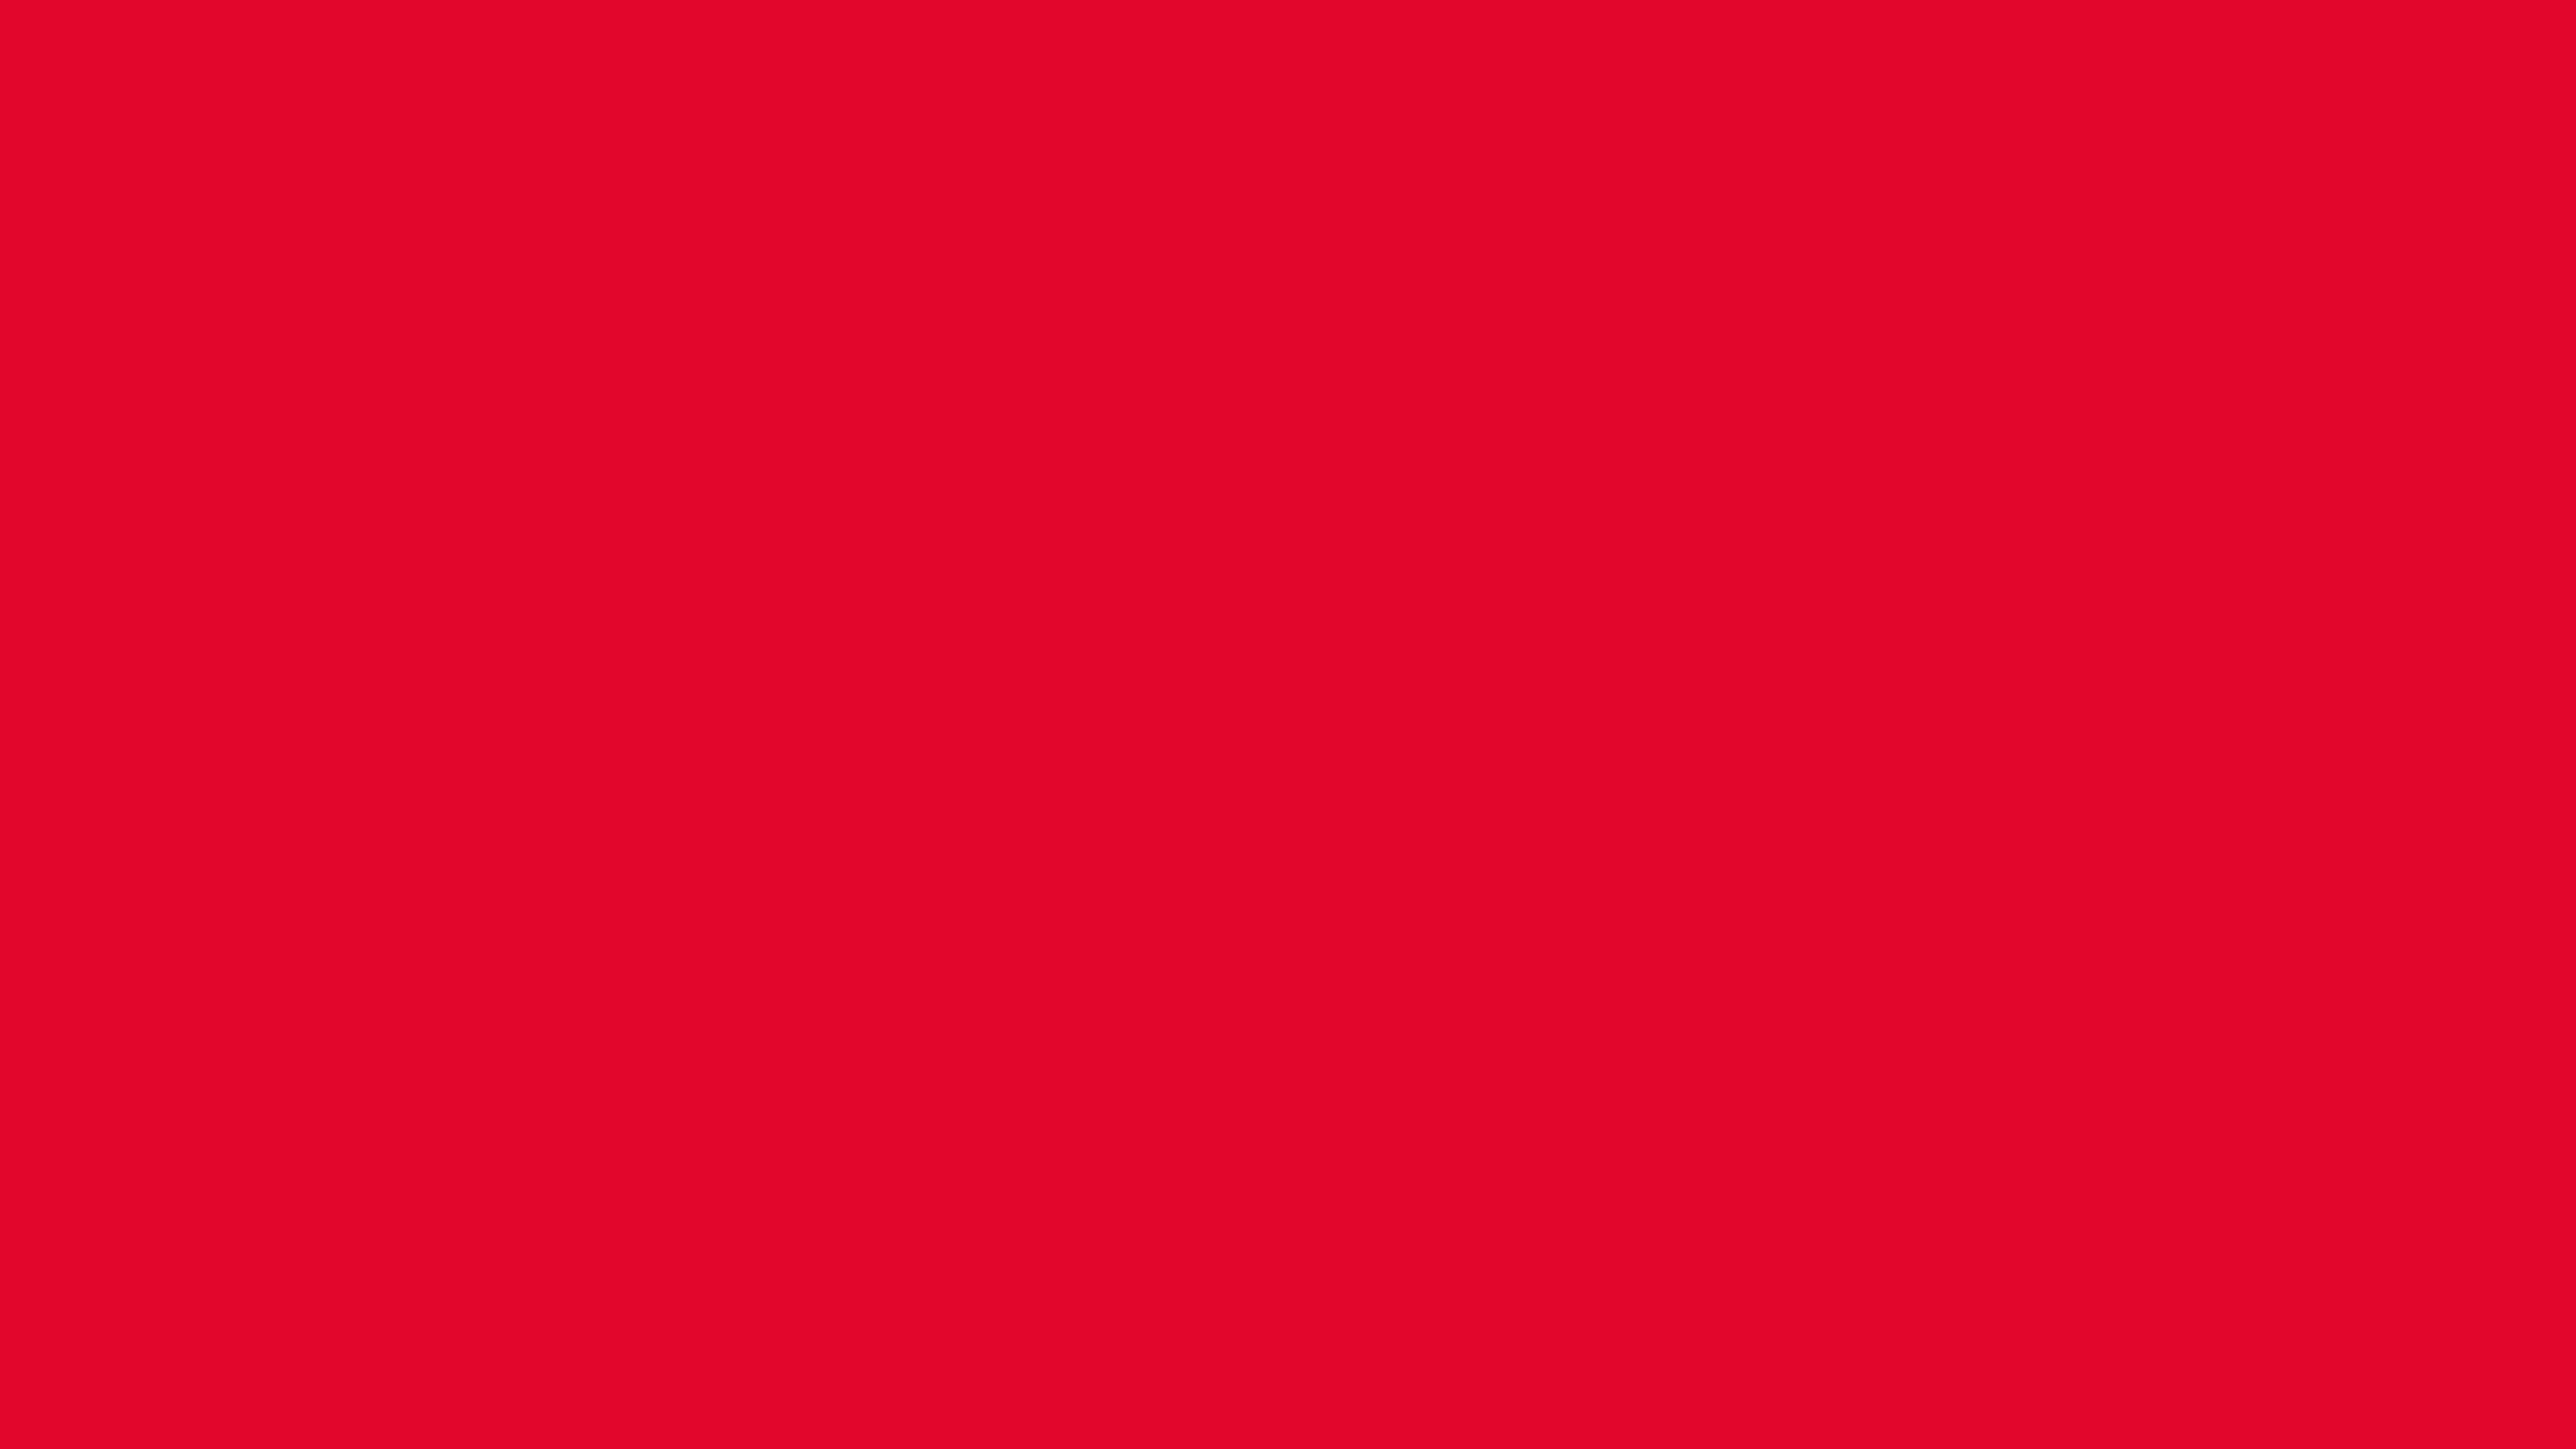 5120x2880 Medium Candy Apple Red Solid Color Background